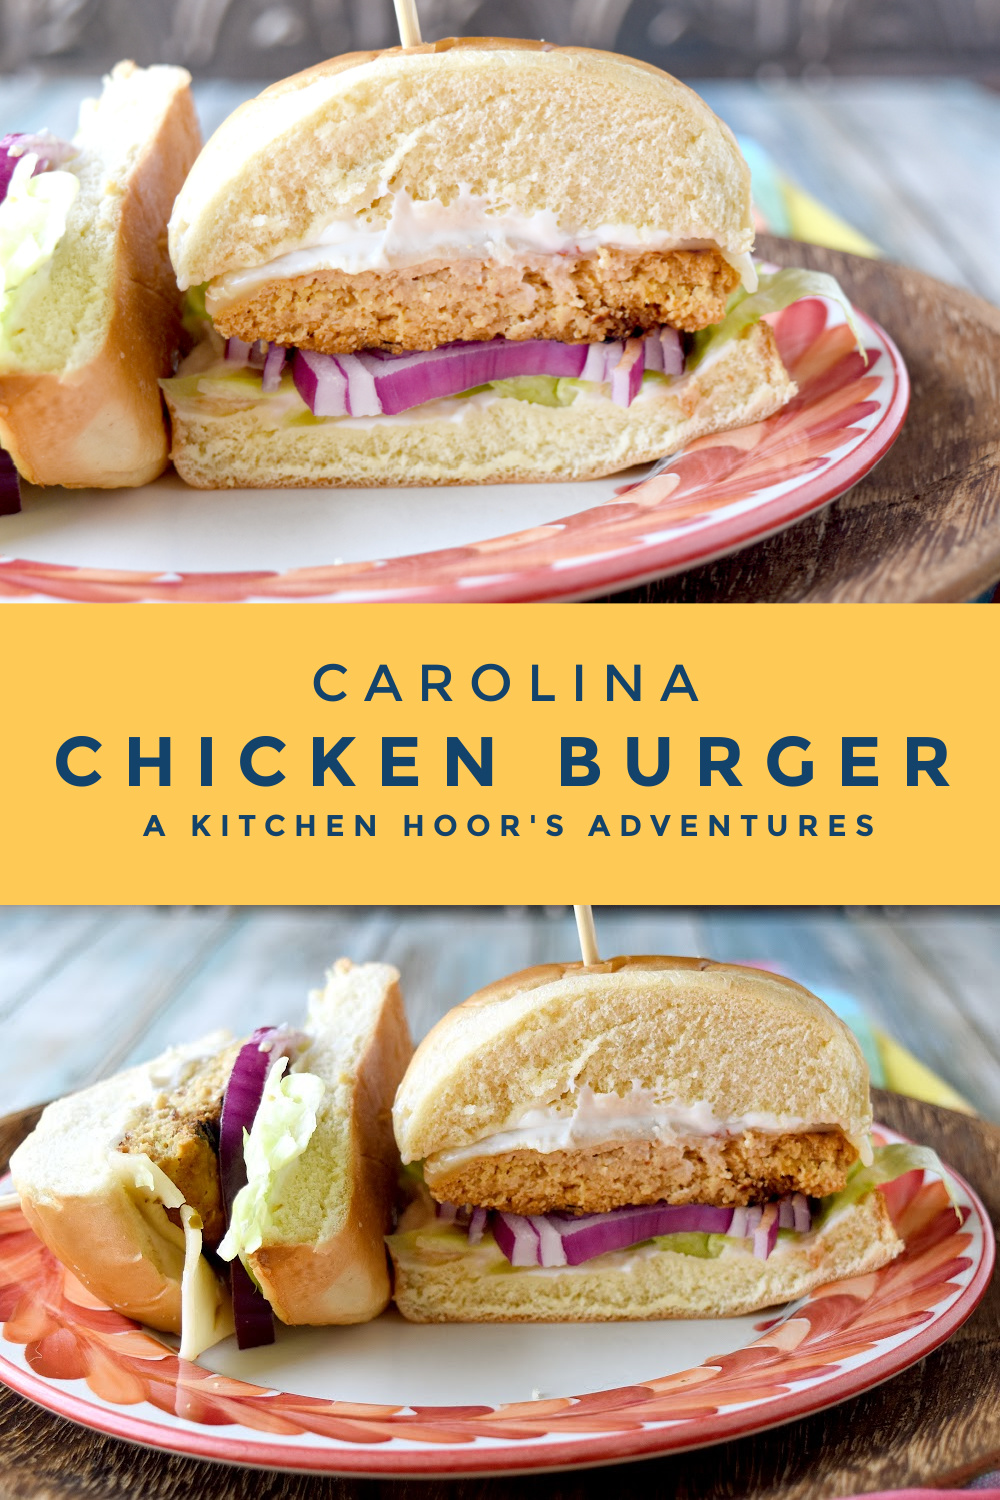 Carolina Chicken Burgers have TONS of flavor